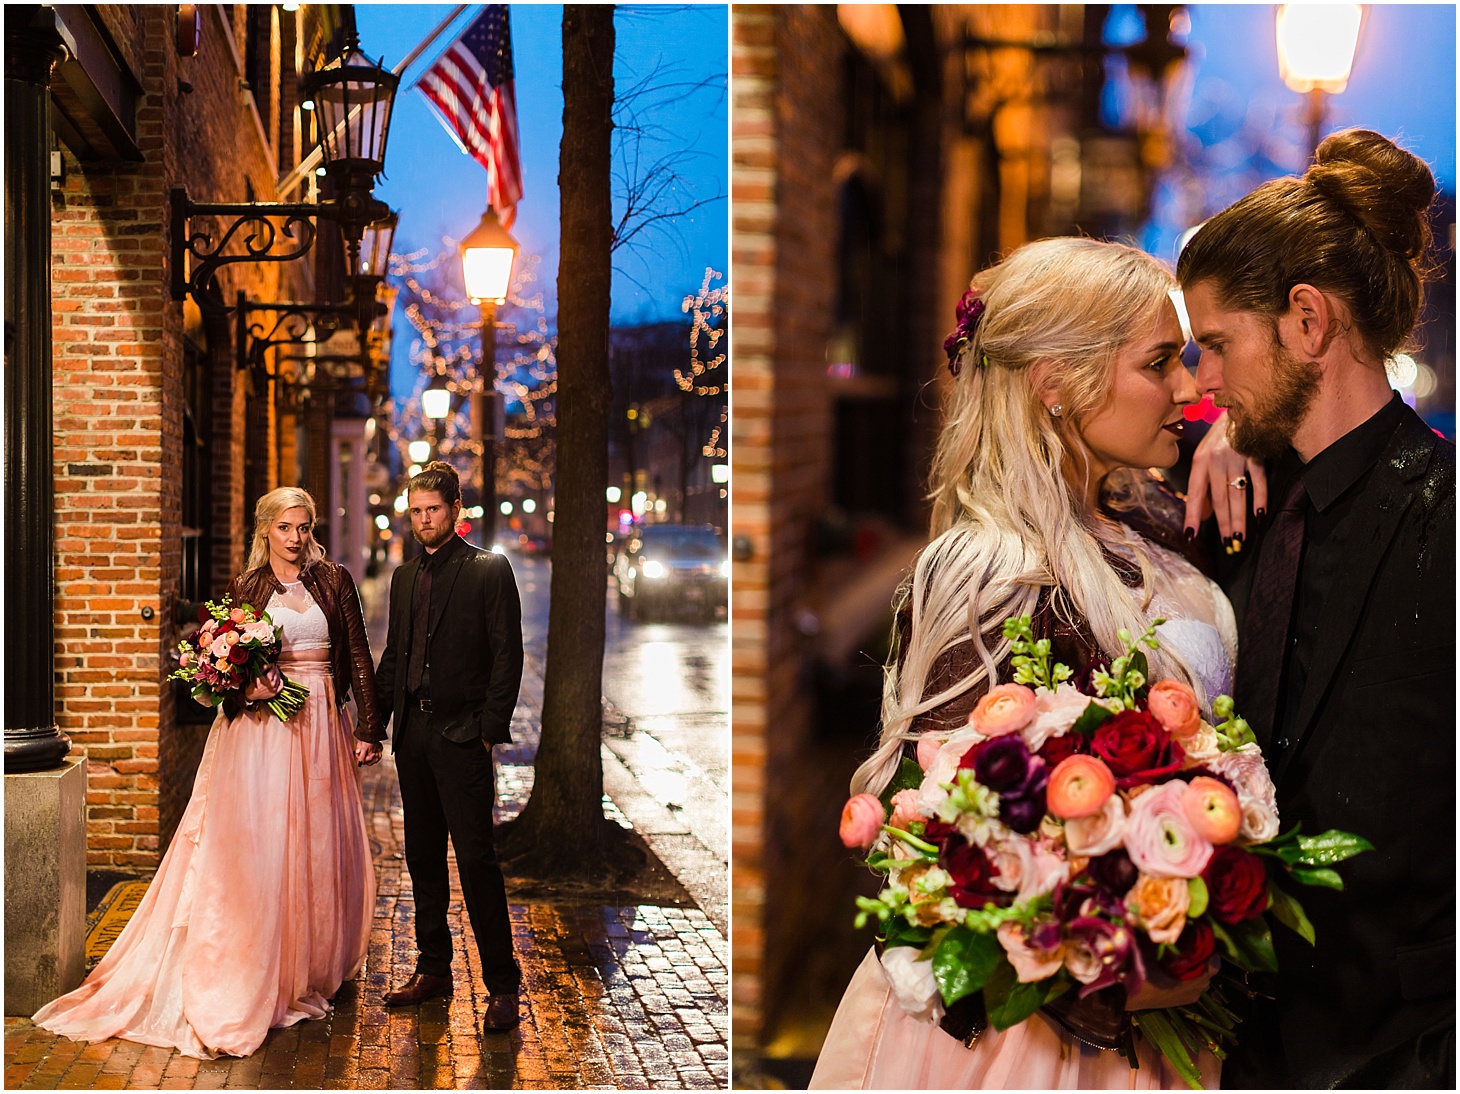 Wedding Portraits in Old Town Alexandria | Black and Red Gothic-Inspired Wedding Editorial | Sarah Bradshaw Photography